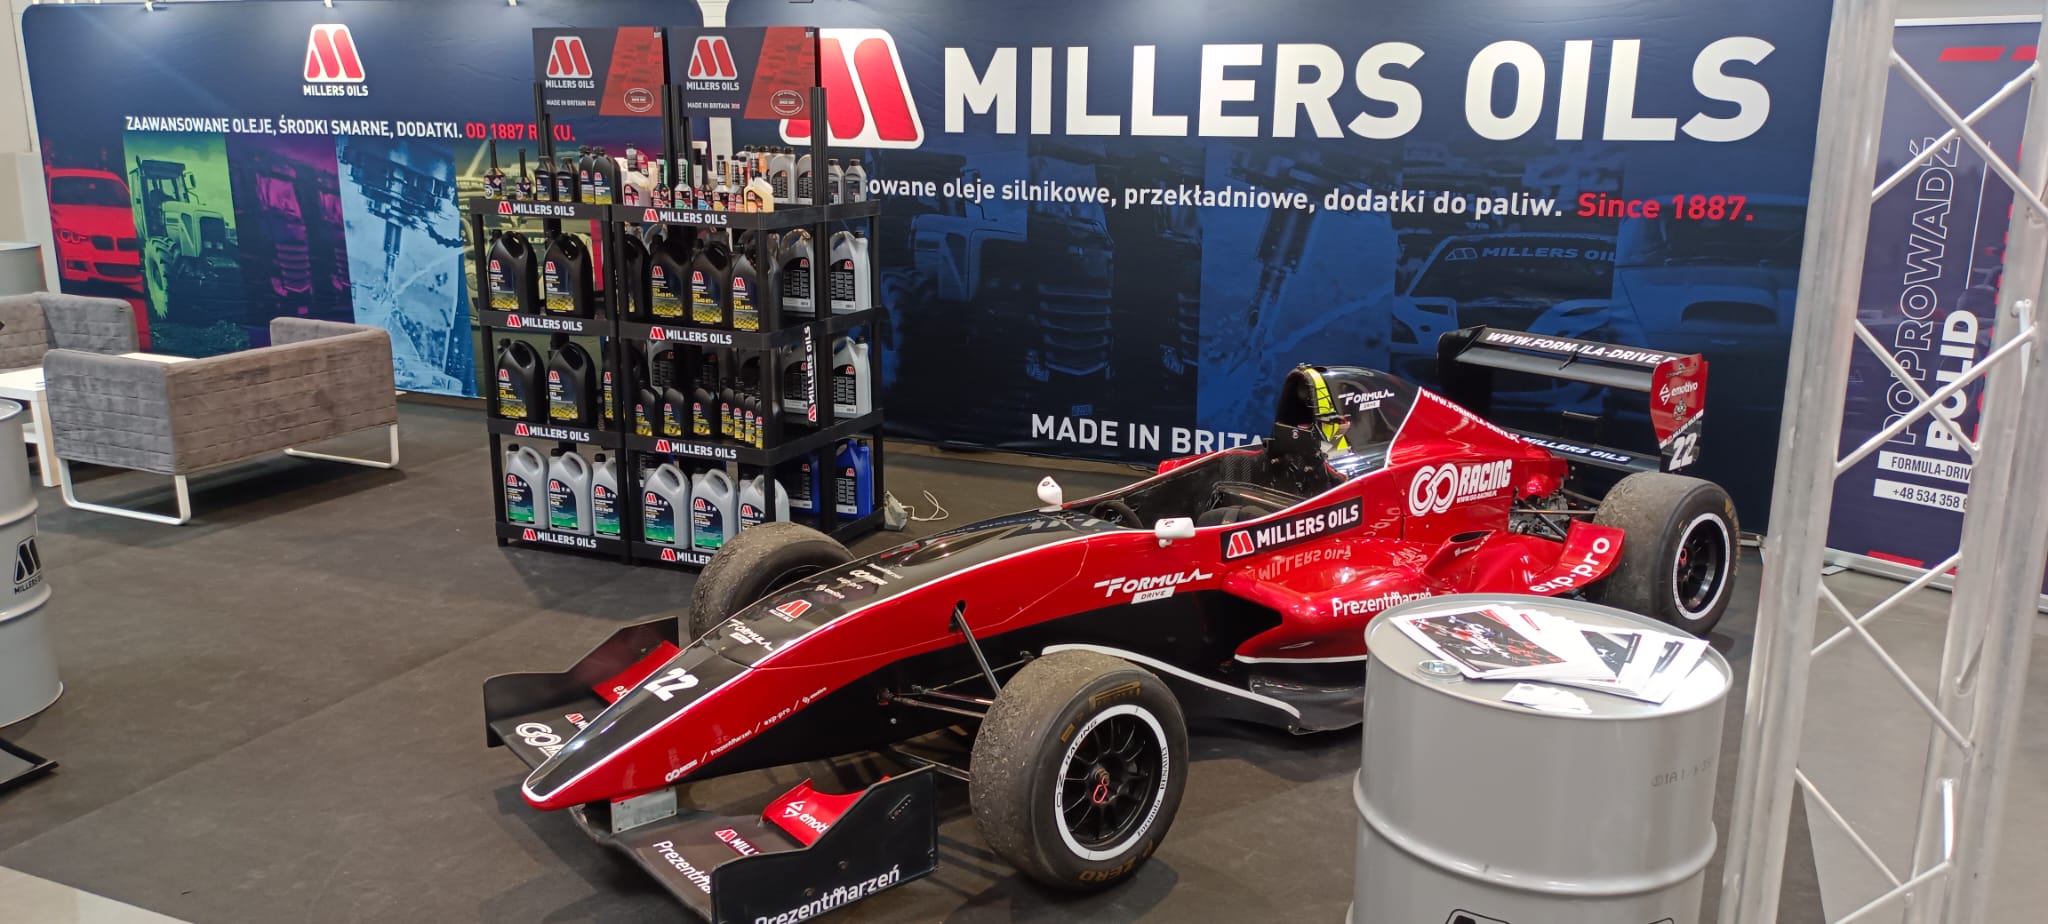 Millers Oils na Tuning Show EXPO w Krakowie